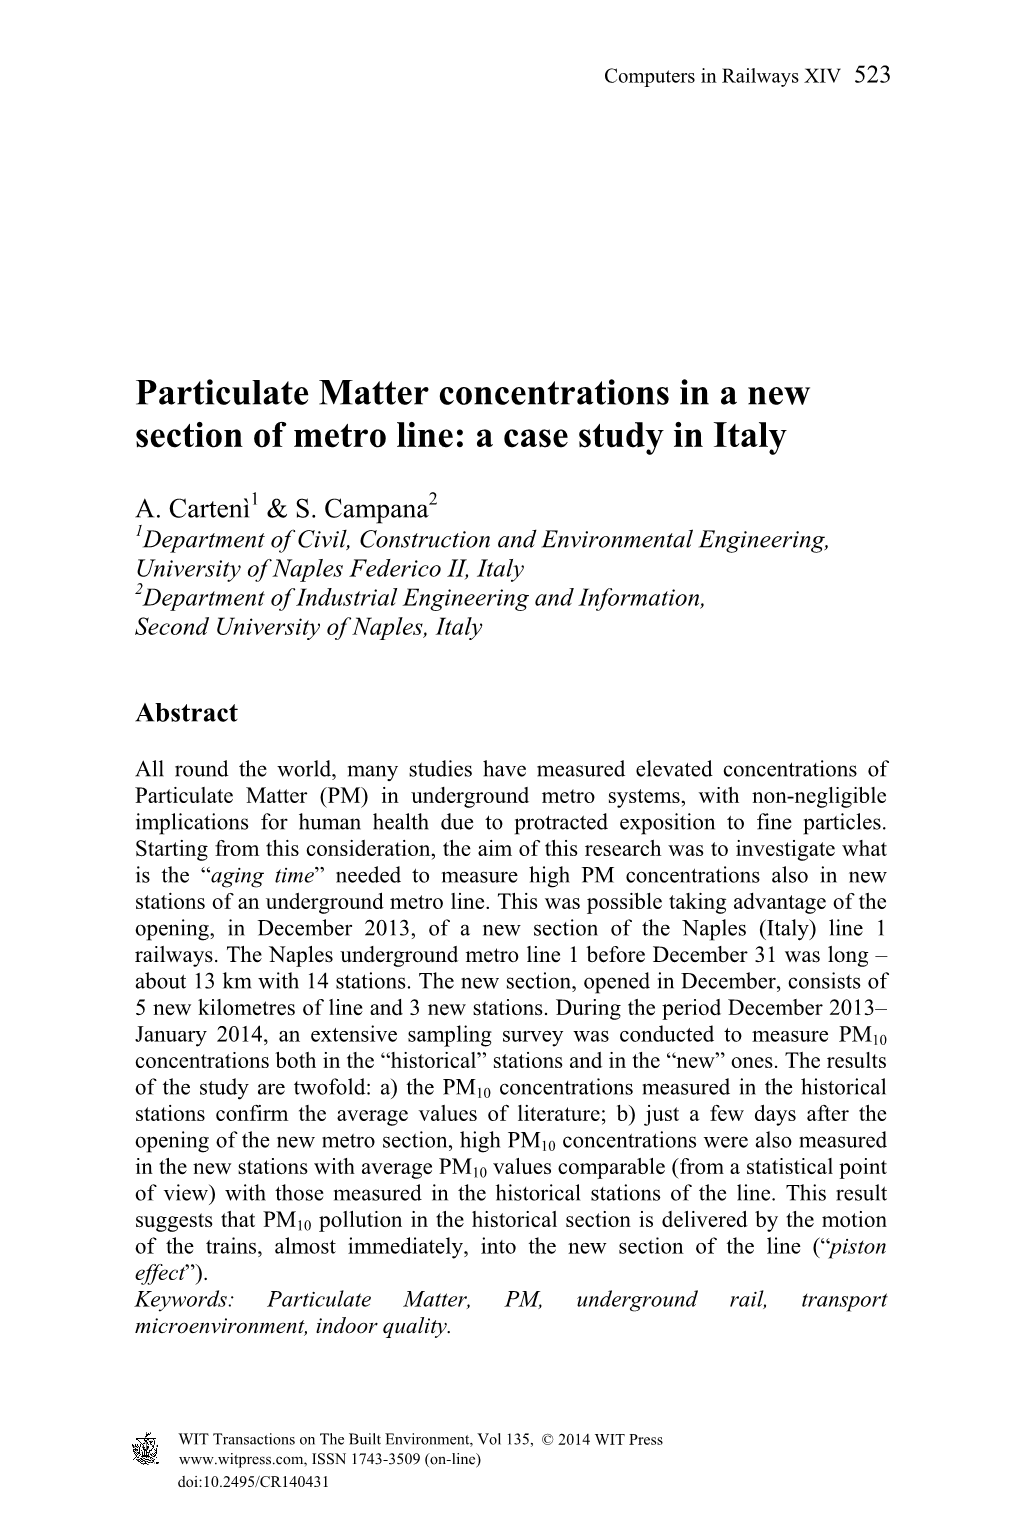 Particulate Matter Concentrations in a New Section of Metro Line: a Case Study in Italy